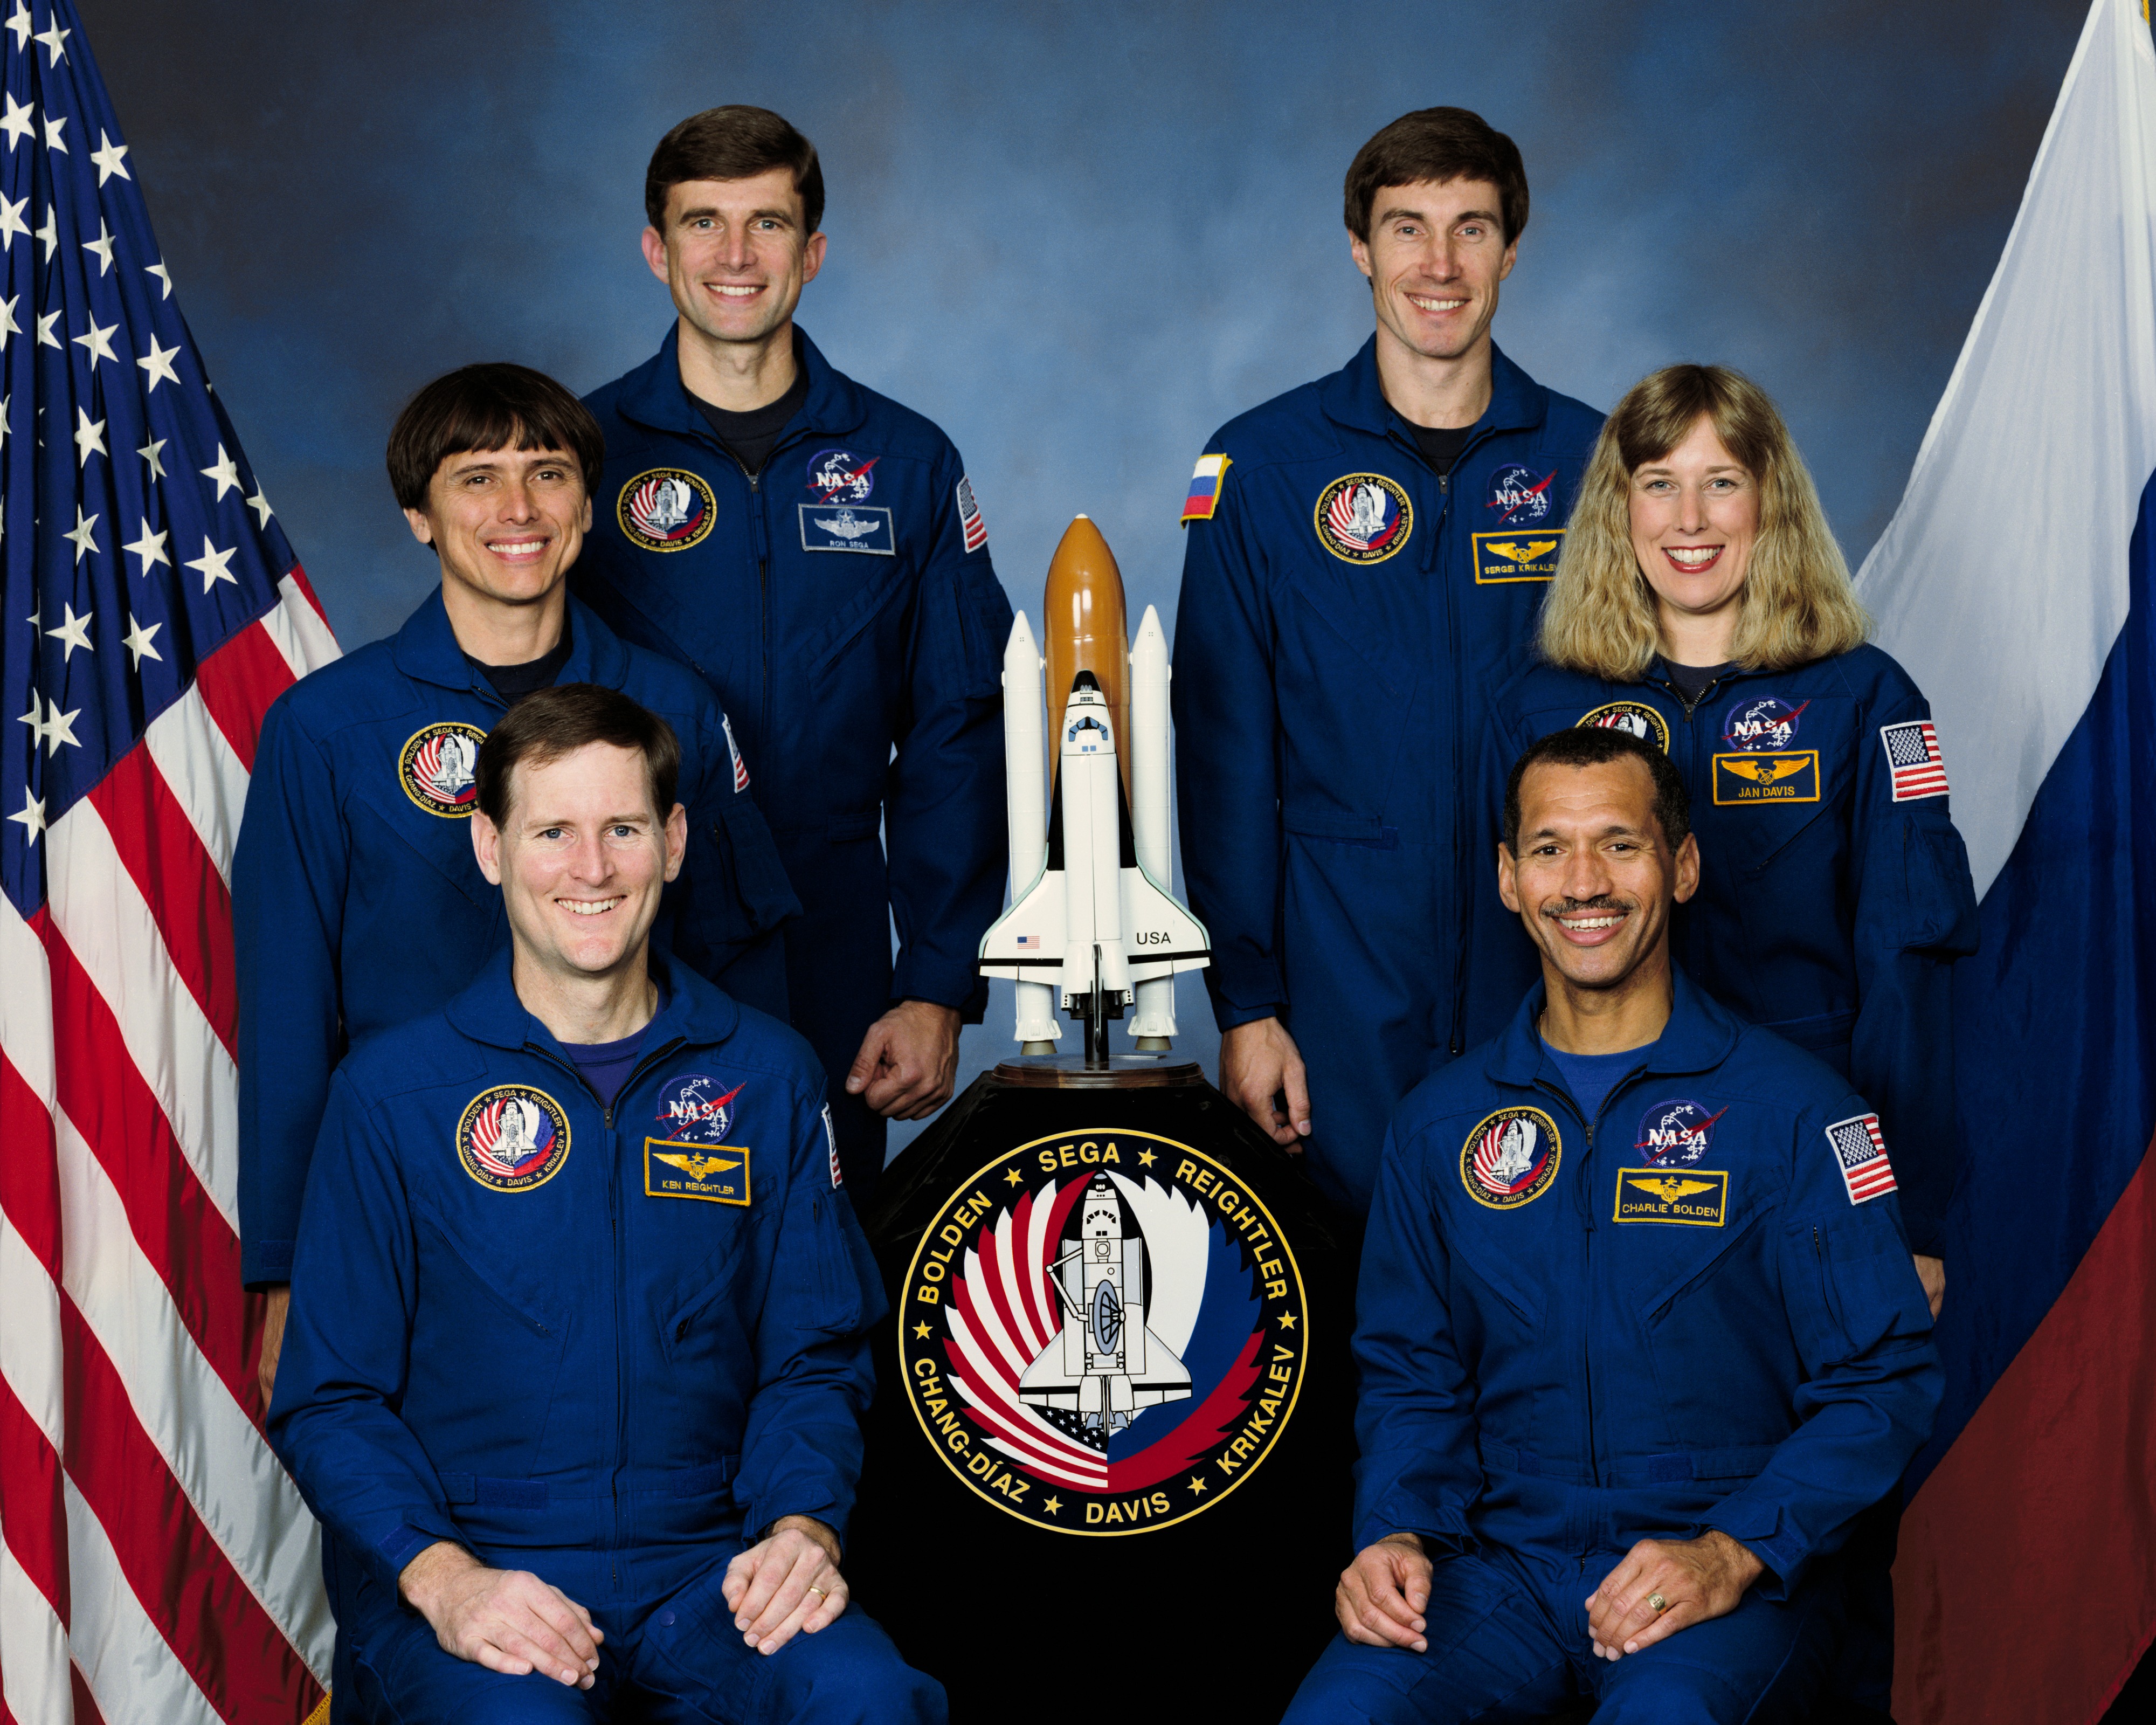 The STS-60 crew of (clockwise from bottom left) Pilot Kenneth S. Reightler, Mission Specialists Franklin R. Chang-Díaz, Ronald M. Sega, Sergei K. Krikalev representing the Russian Space Agency, now Roscosmos, and N. Jan Davis, and Commander Charles F. Bolden